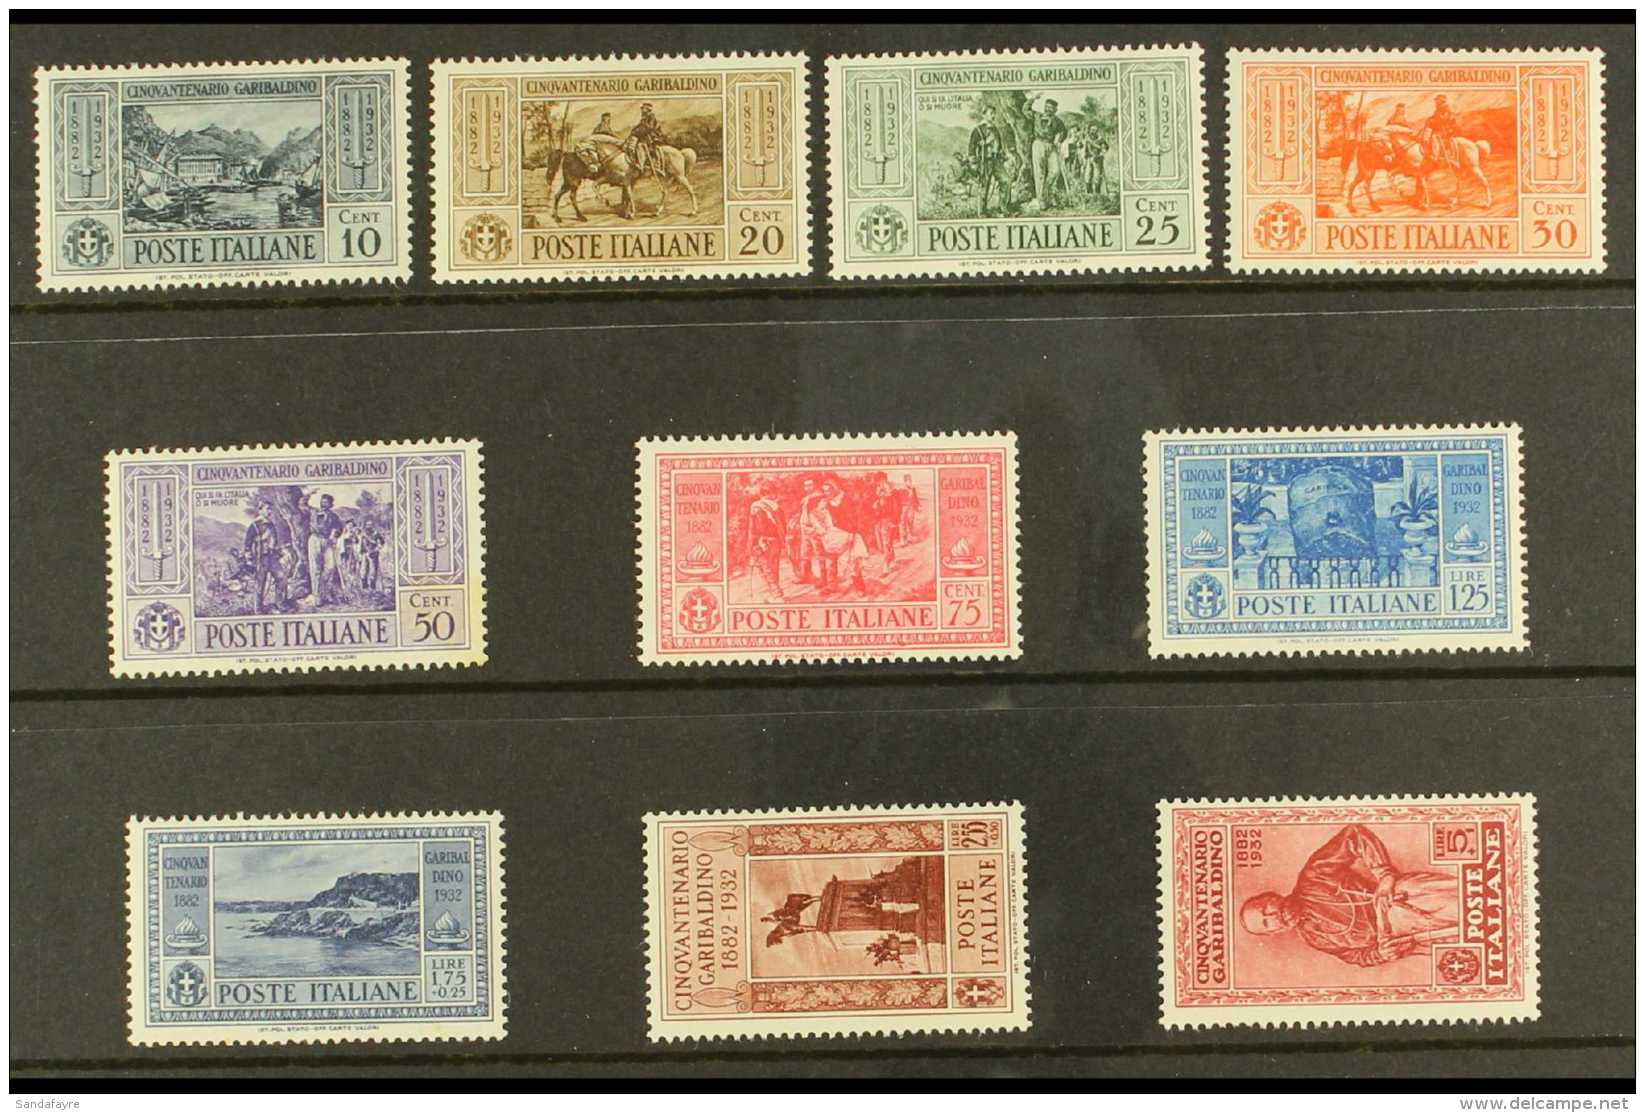 1932 Garibaldi Postage Set, Sass S63, Superb Never Hinged Mint. Cat &euro;500 (&pound;425)  (10 Stamps) For More... - Unclassified